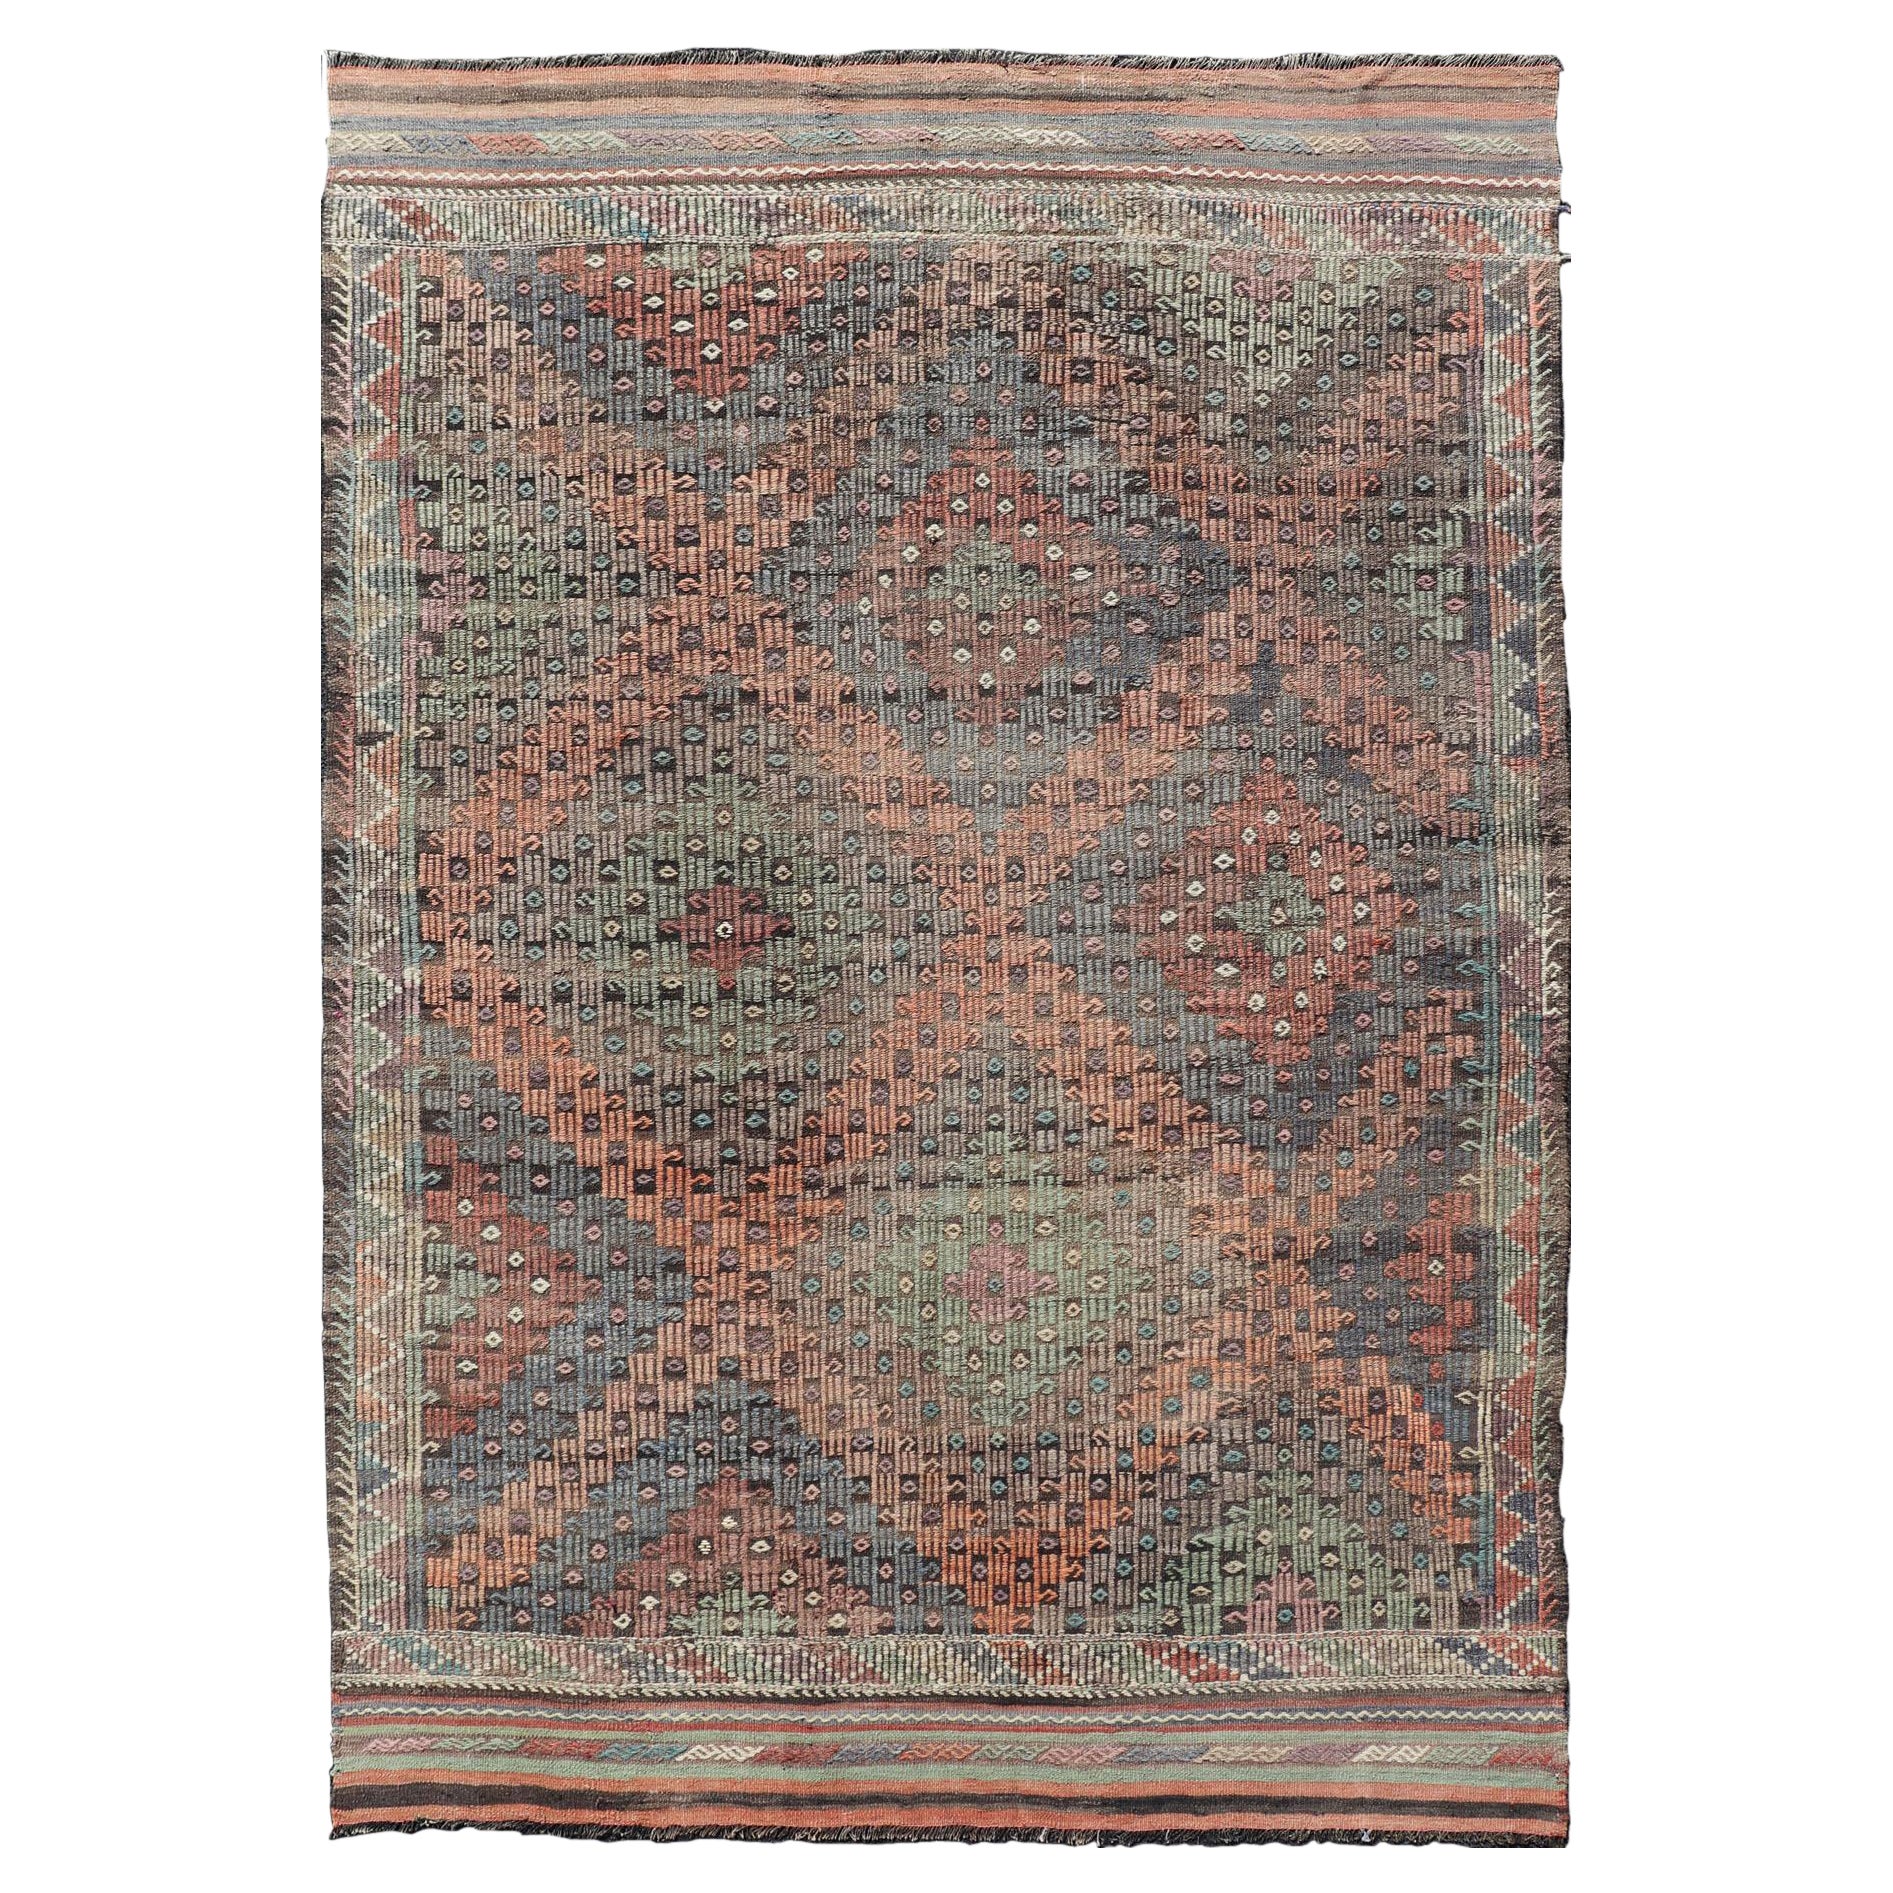 Softly Colored Turkish Vintage Embroidered Kilim Rug with Multi Layered Diamond For Sale